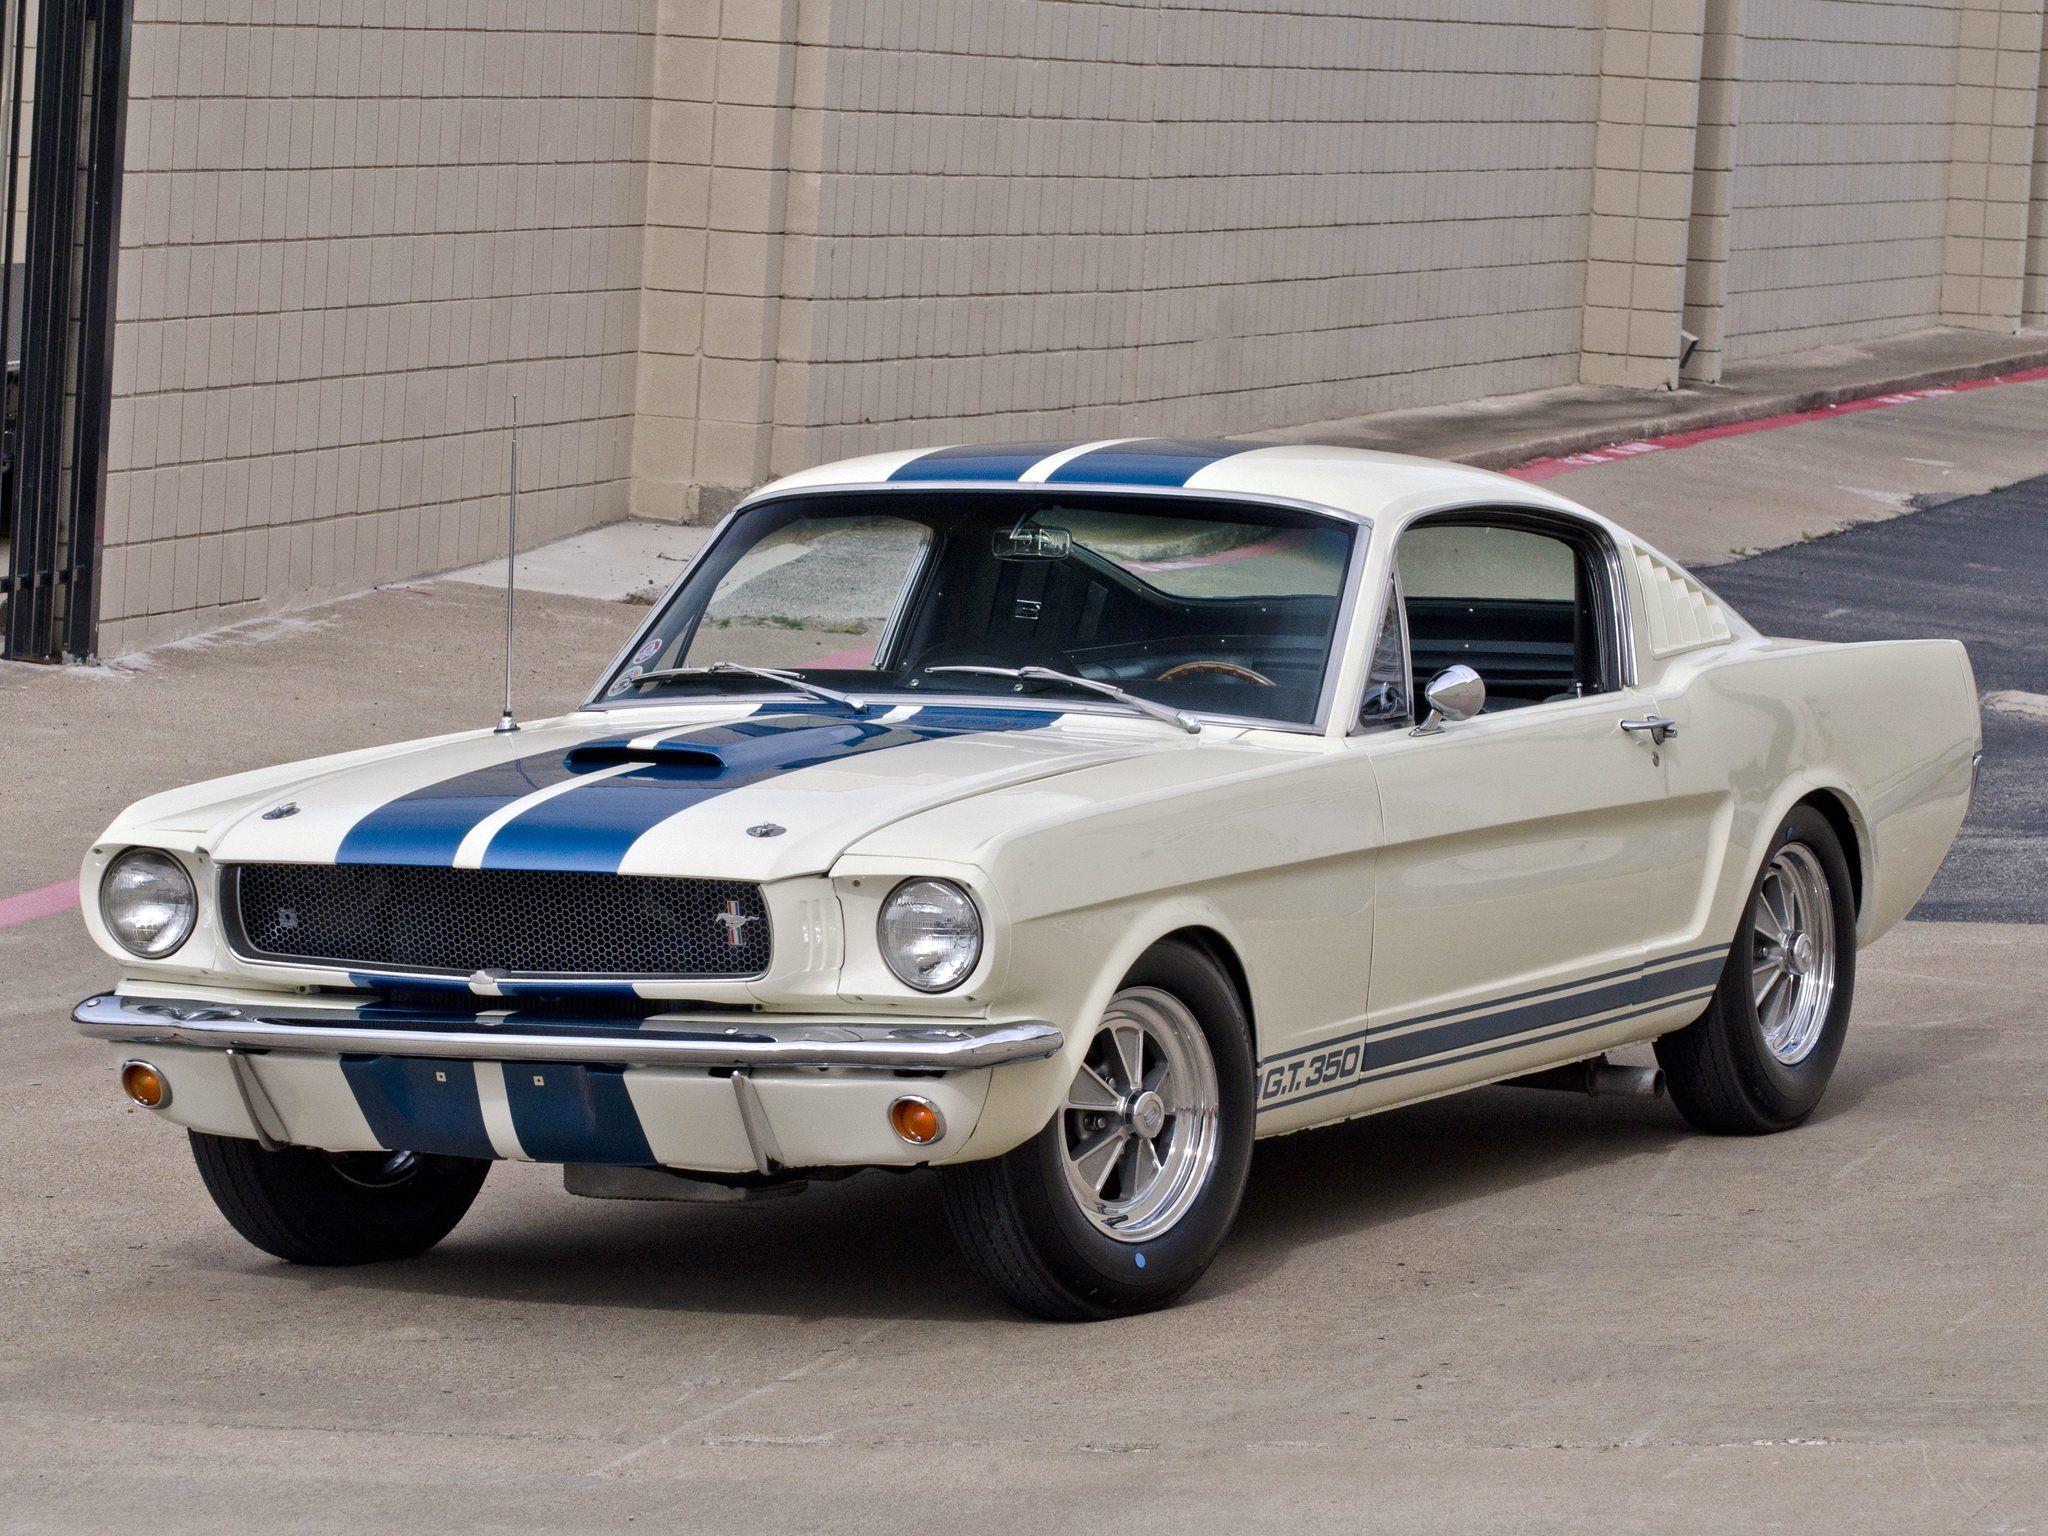 Shelby GT350 ford mustang classic muscle d wallpaper. Image